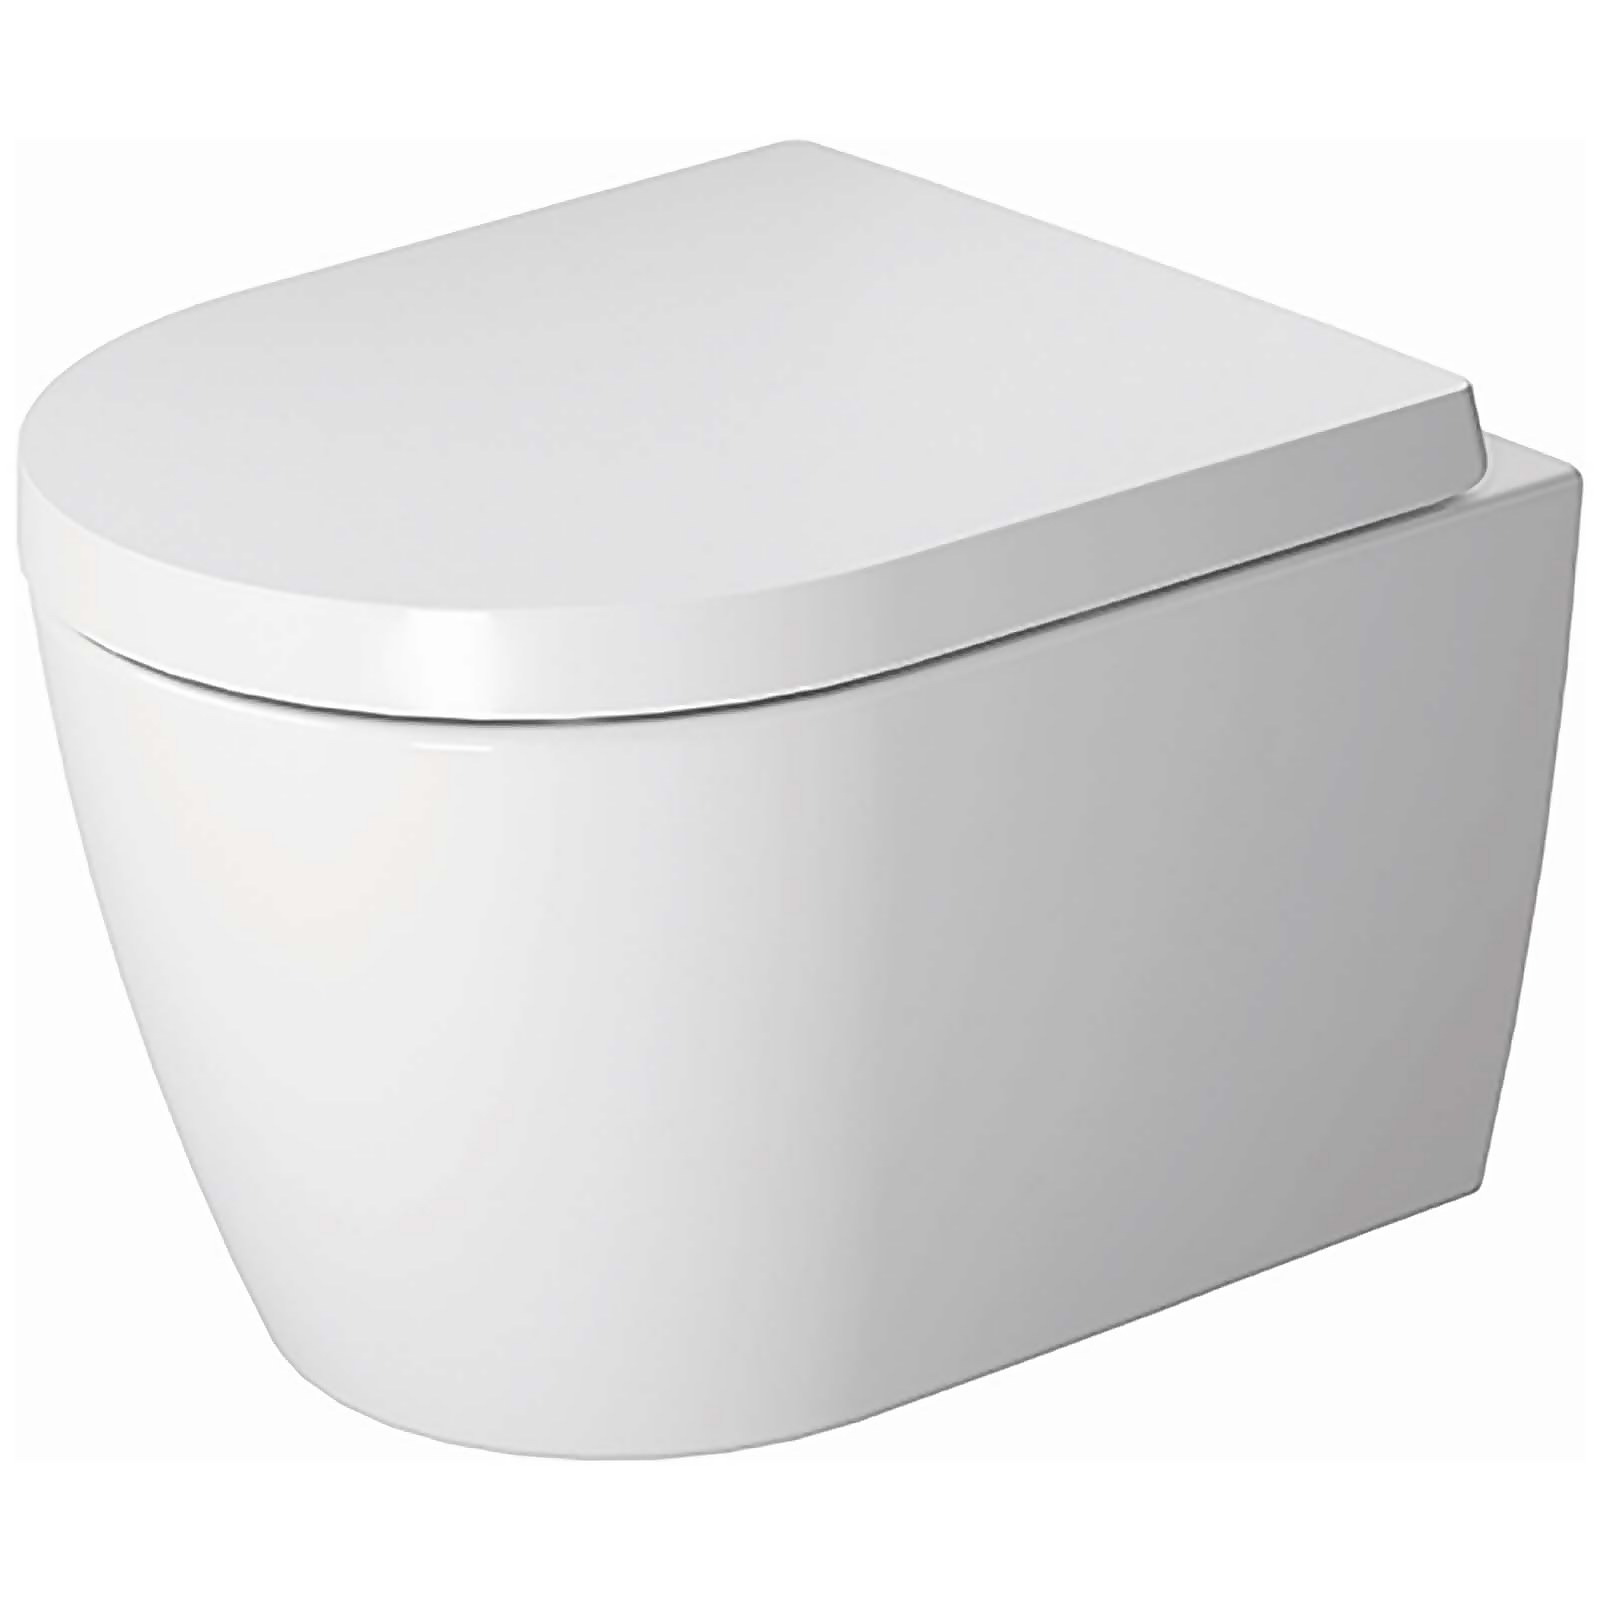 Photo of Duravit Me By Starck Compact Wall Hung Toilet